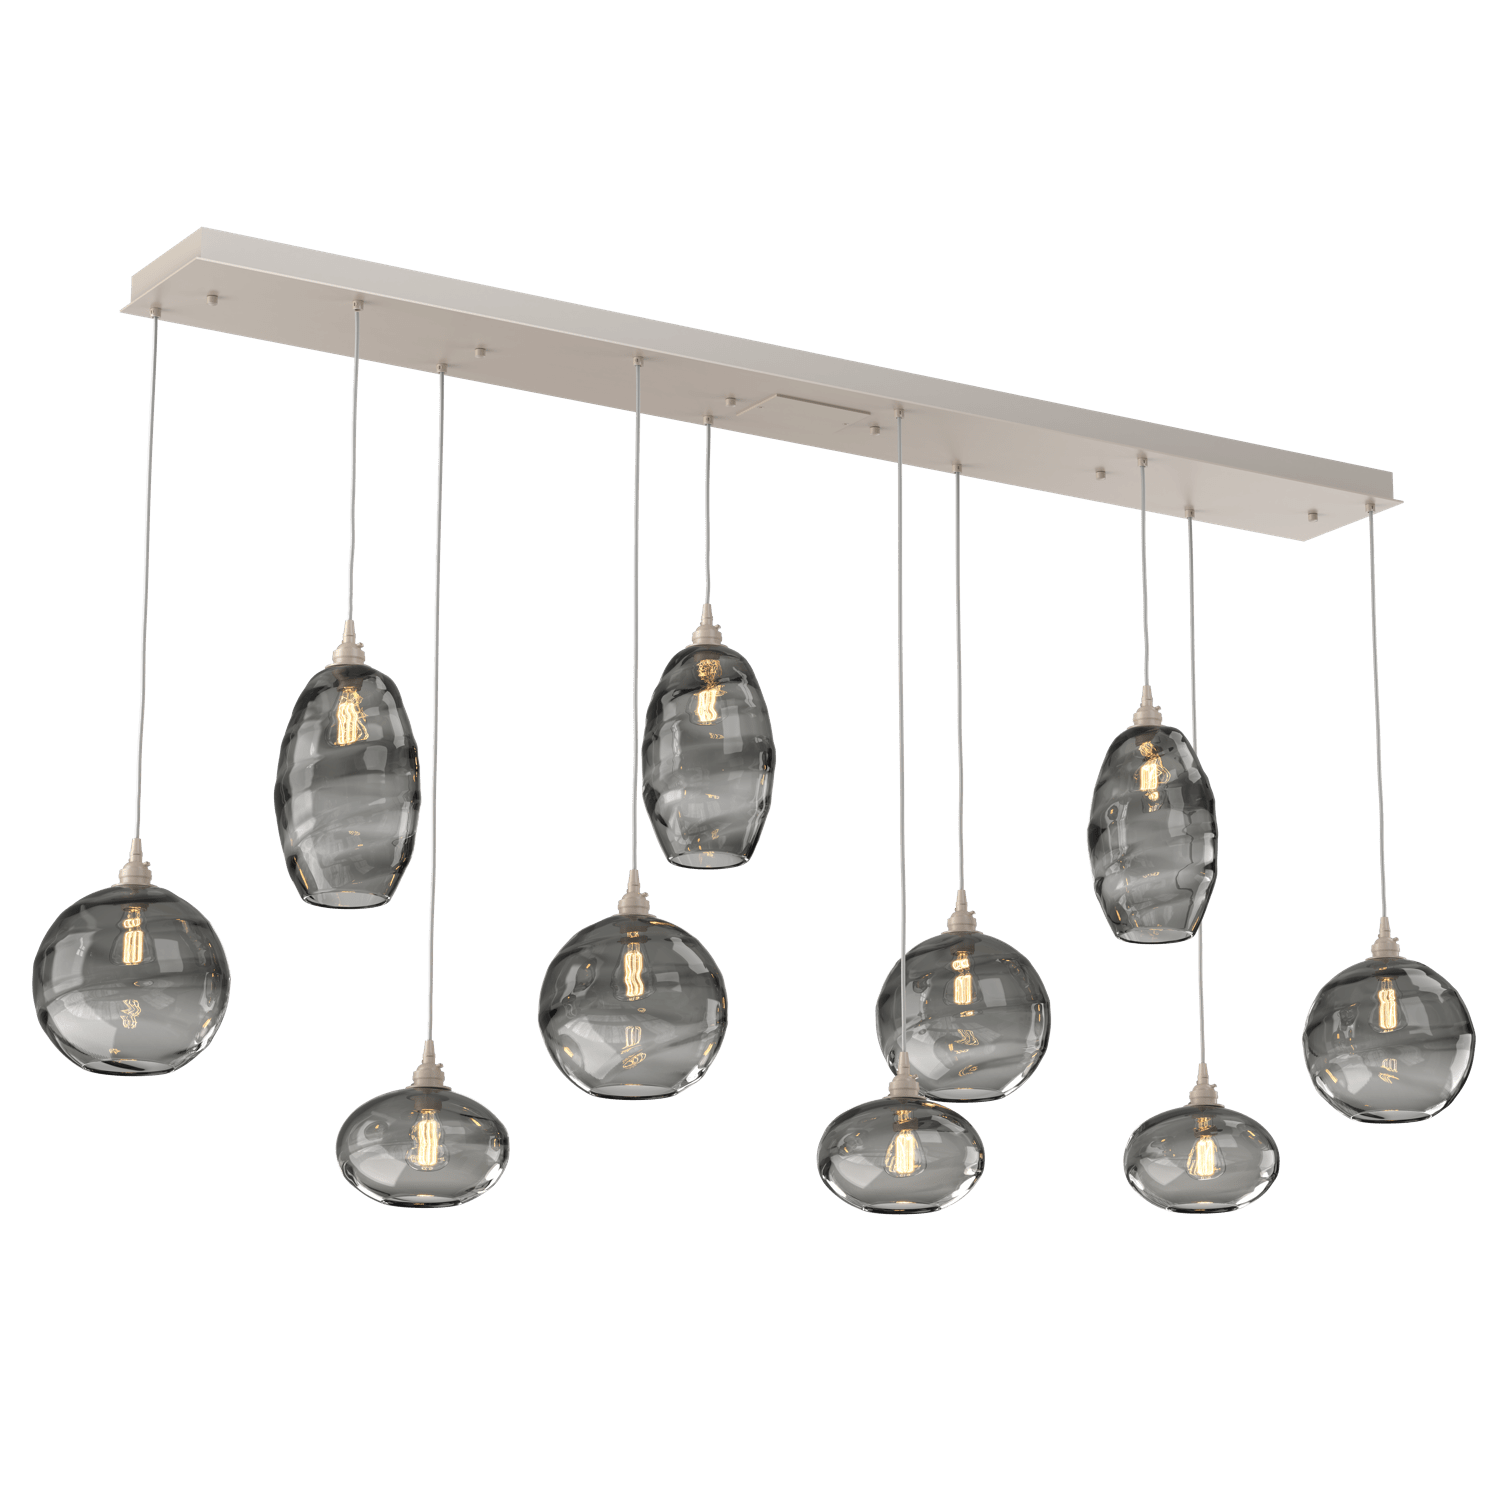 PLB0048-10-BS-OS-Hammerton-Studio-Optic-Blown-Glass-Misto-10-light-linear-pendant-chandelier-with-metallic-beige-silver-finish-and-optic-smoke-blown-glass-shades-and-incandescent-lamping